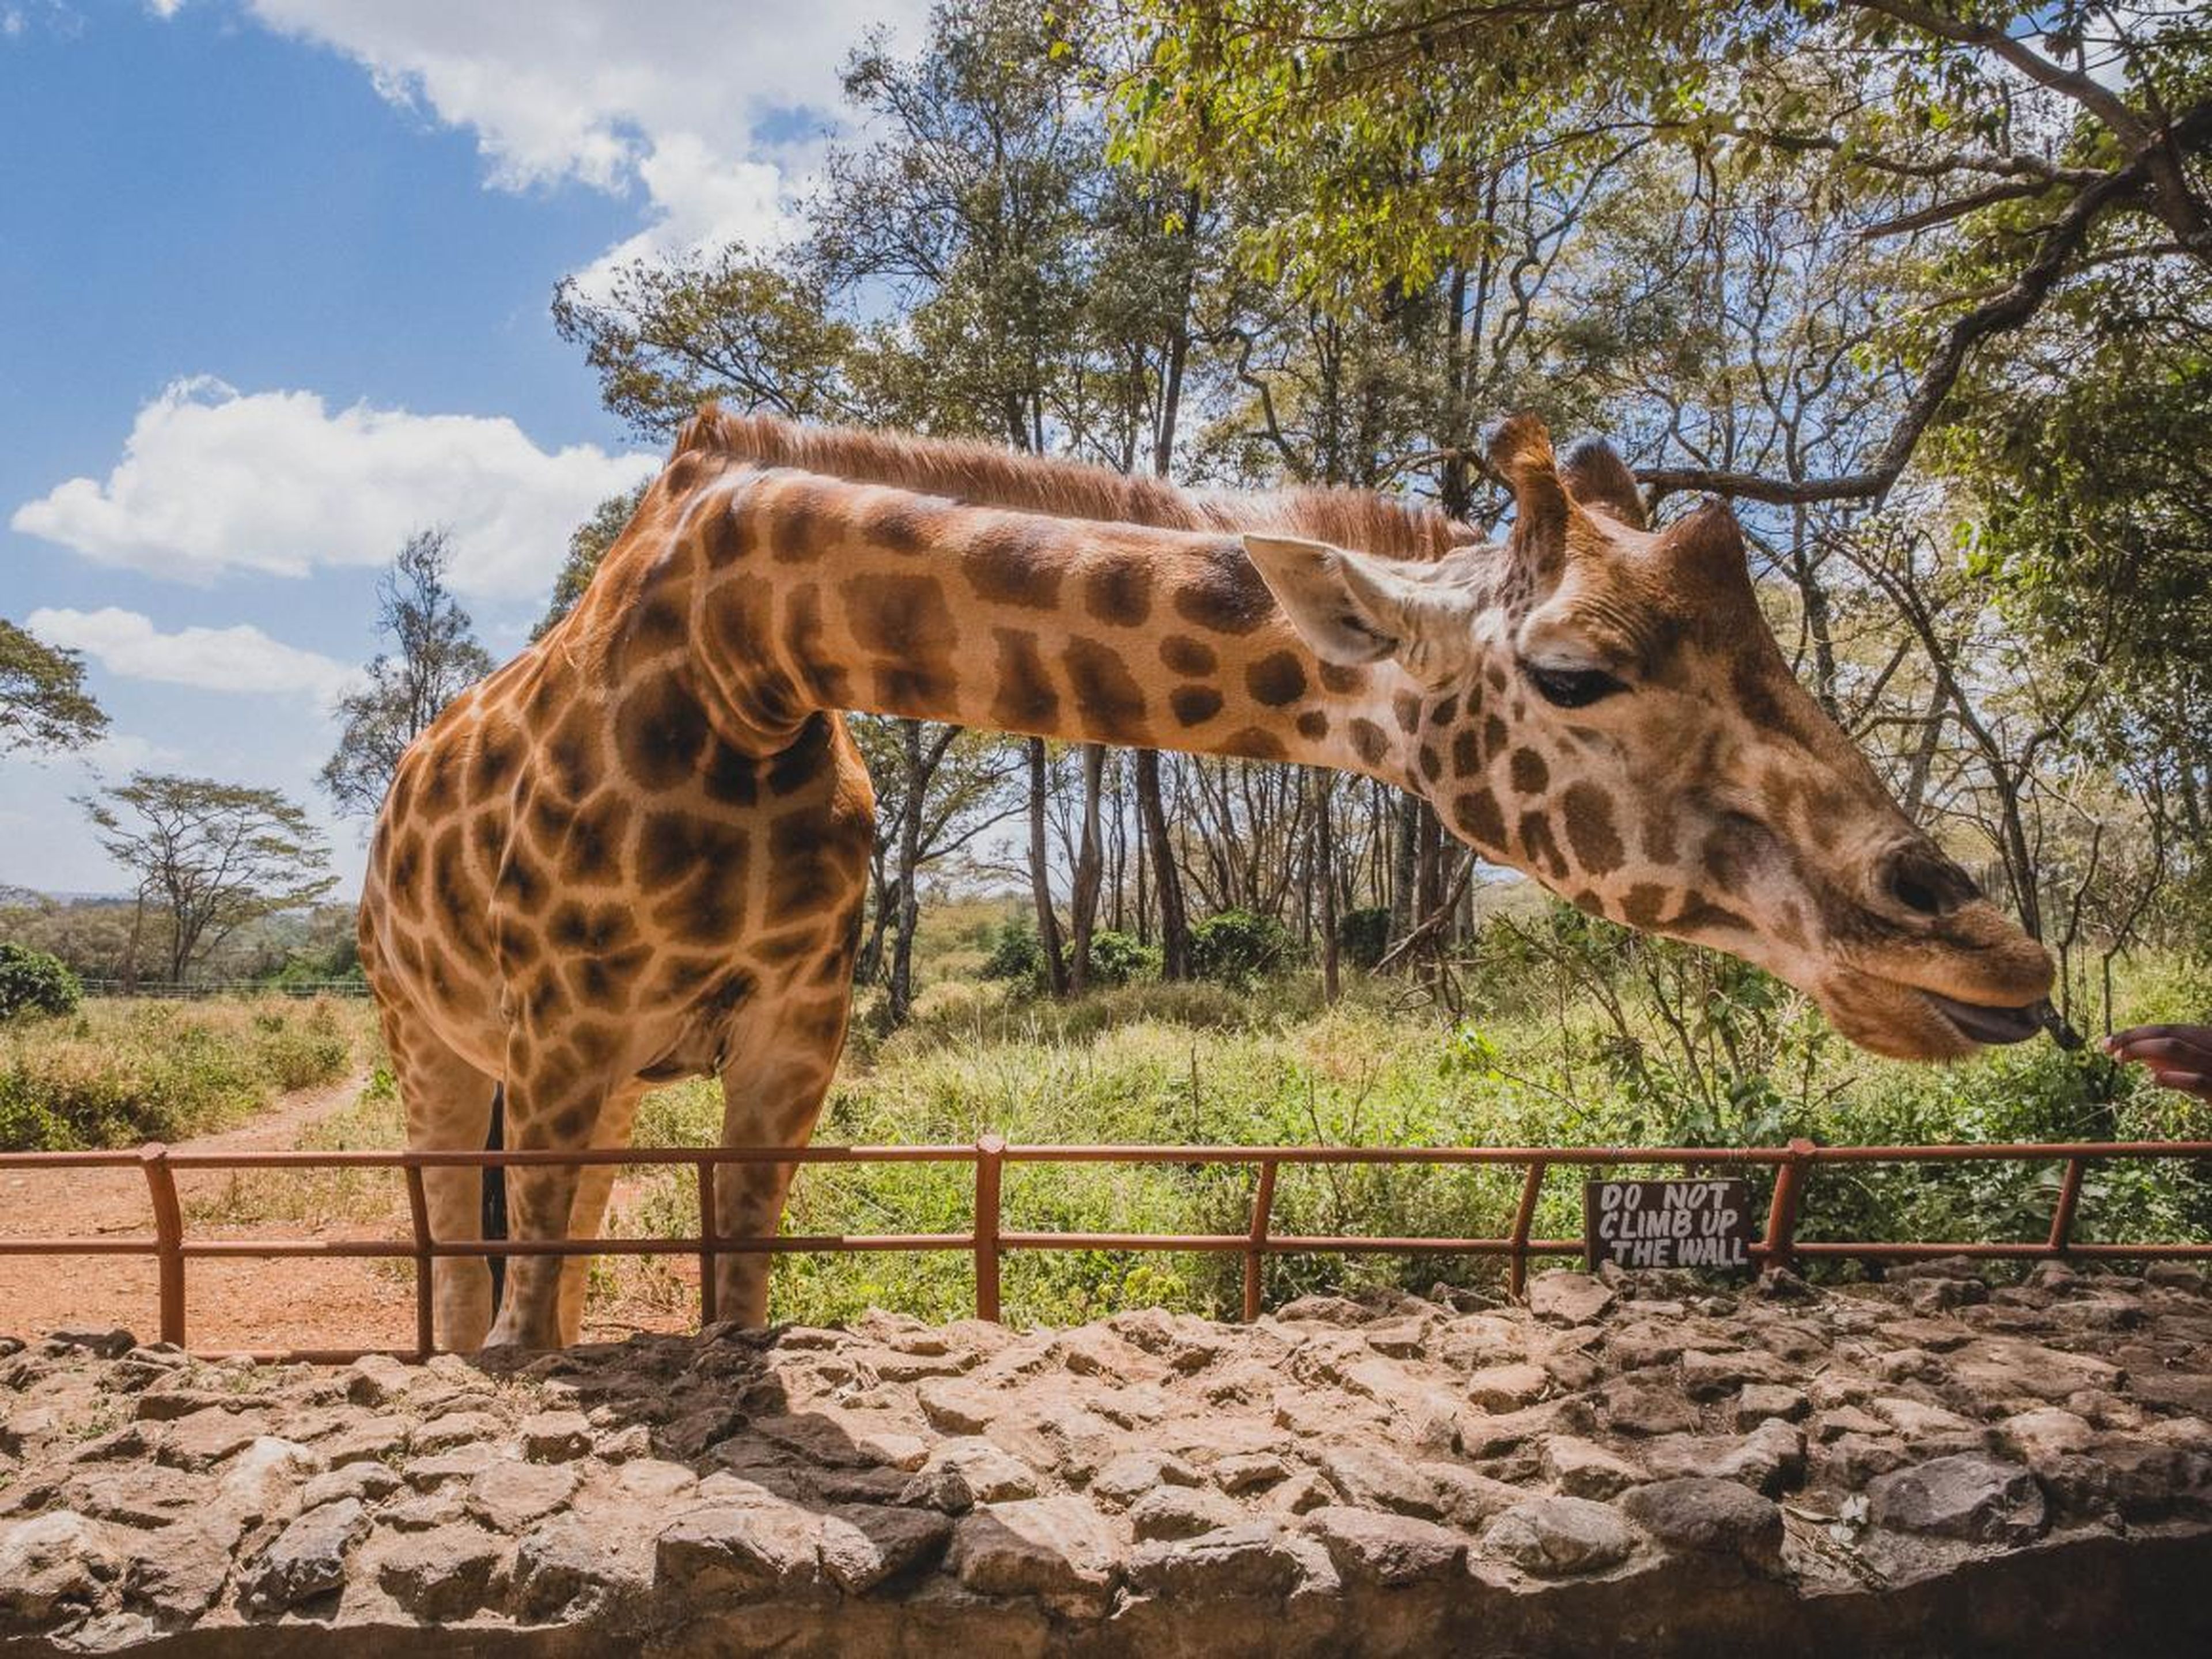 I didn't get a ton of time in Kenya, but what time I did have I spent exploring Nairobi and the surrounding areas. I loved visiting the Giraffe Centre. For $10, I was able to feed giraffes and learn about the center's conservation